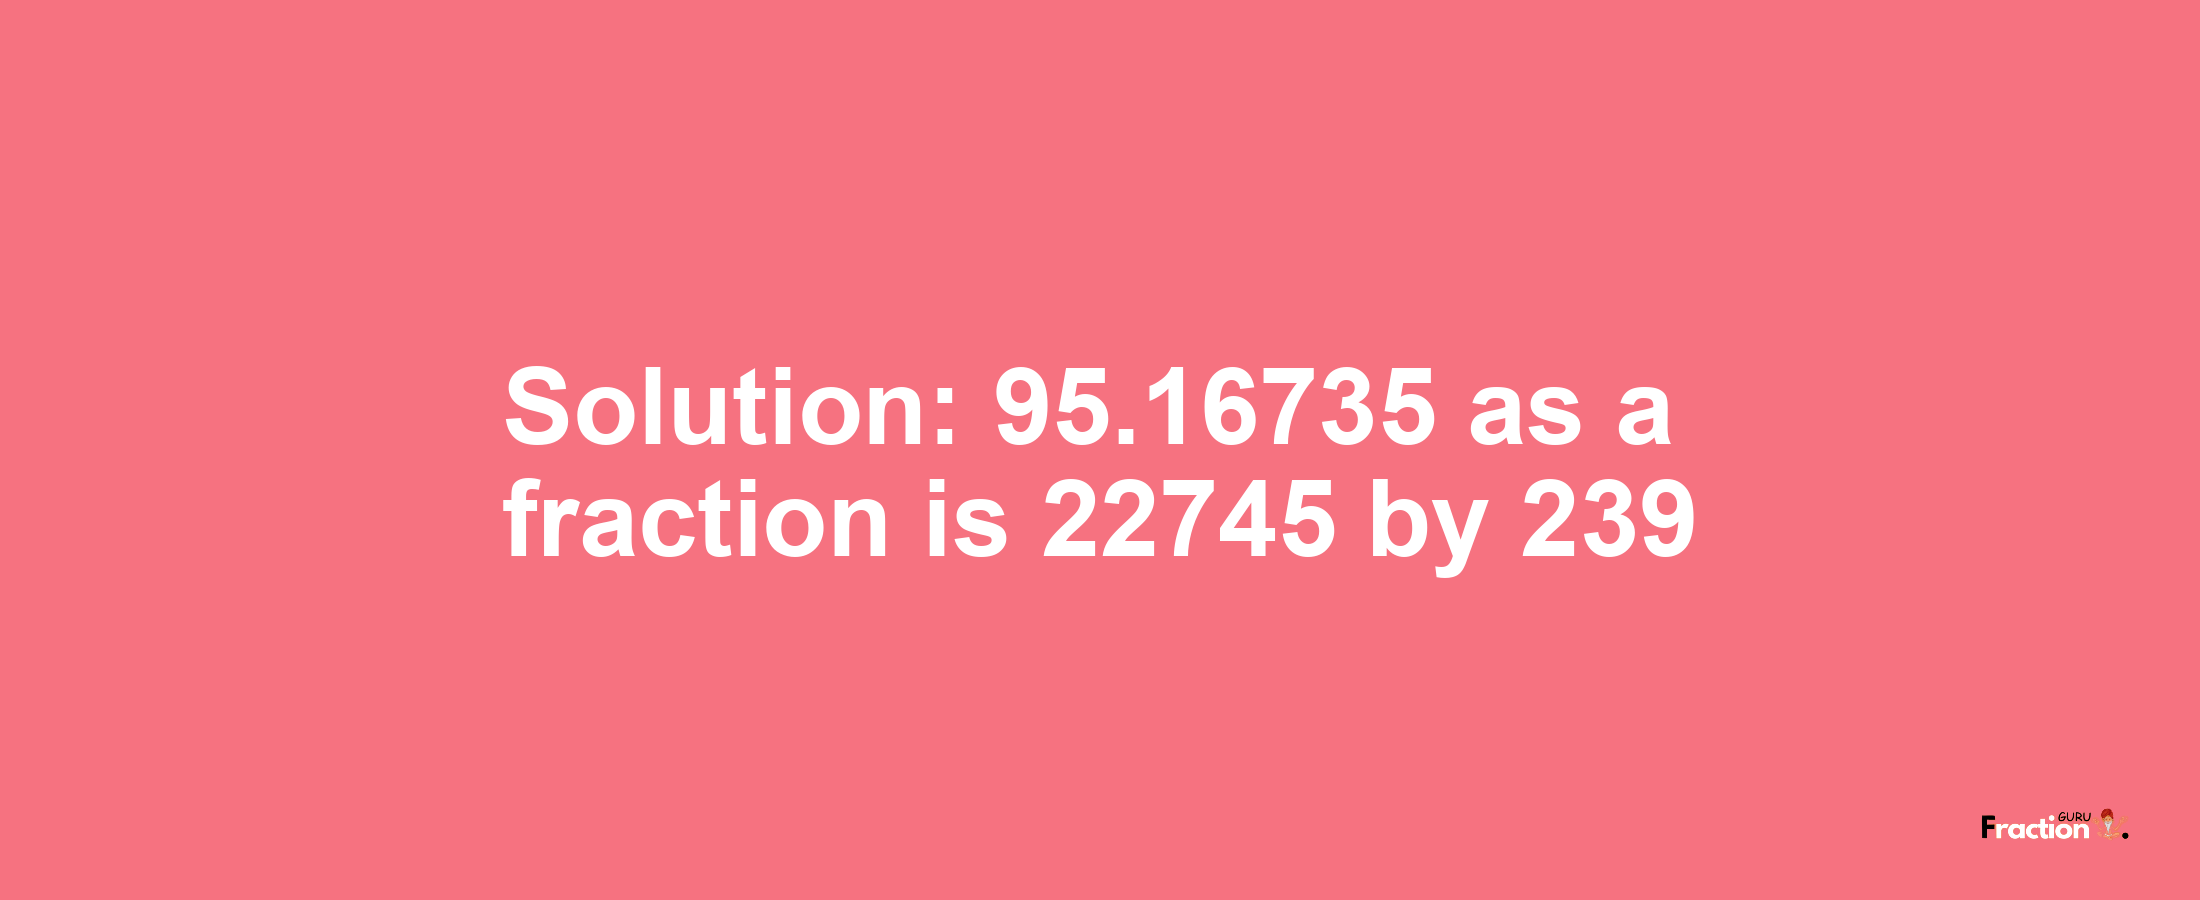 Solution:95.16735 as a fraction is 22745/239